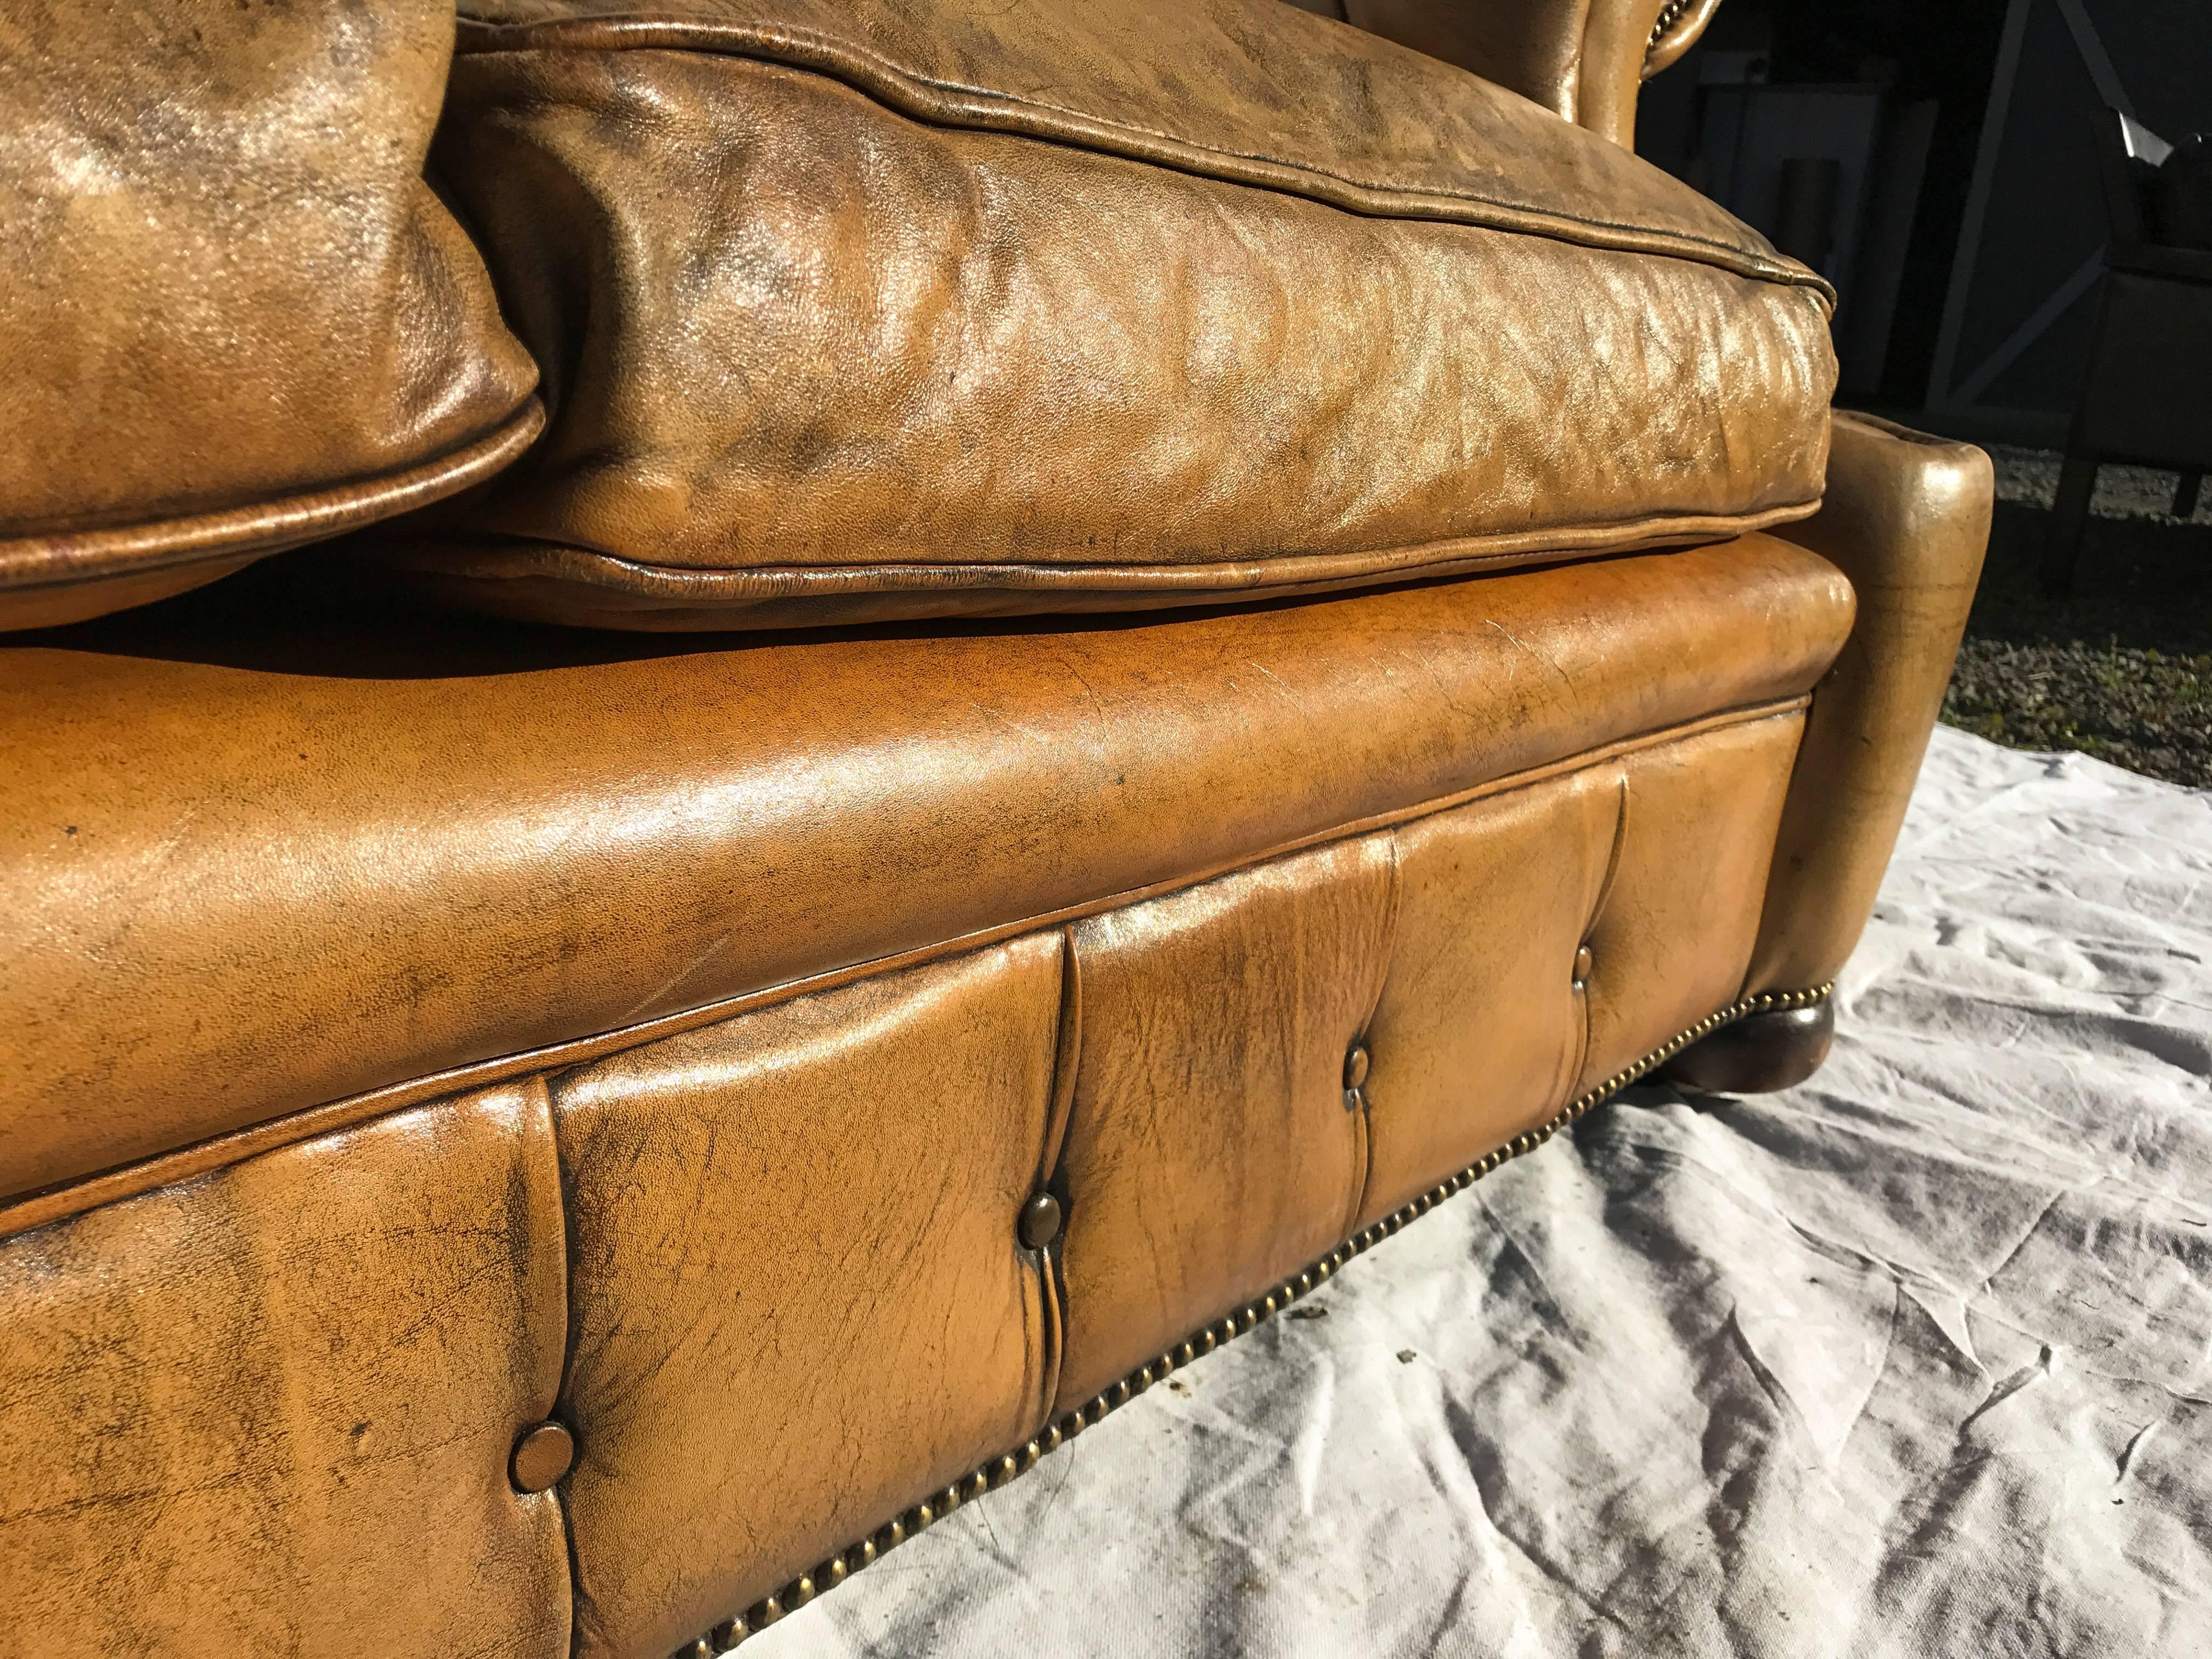 Early 20th century leather Chesterfield sofa with curved armrests and a tufted back. Cognac leather and brass nailheads, both with a beautiful patina.
 